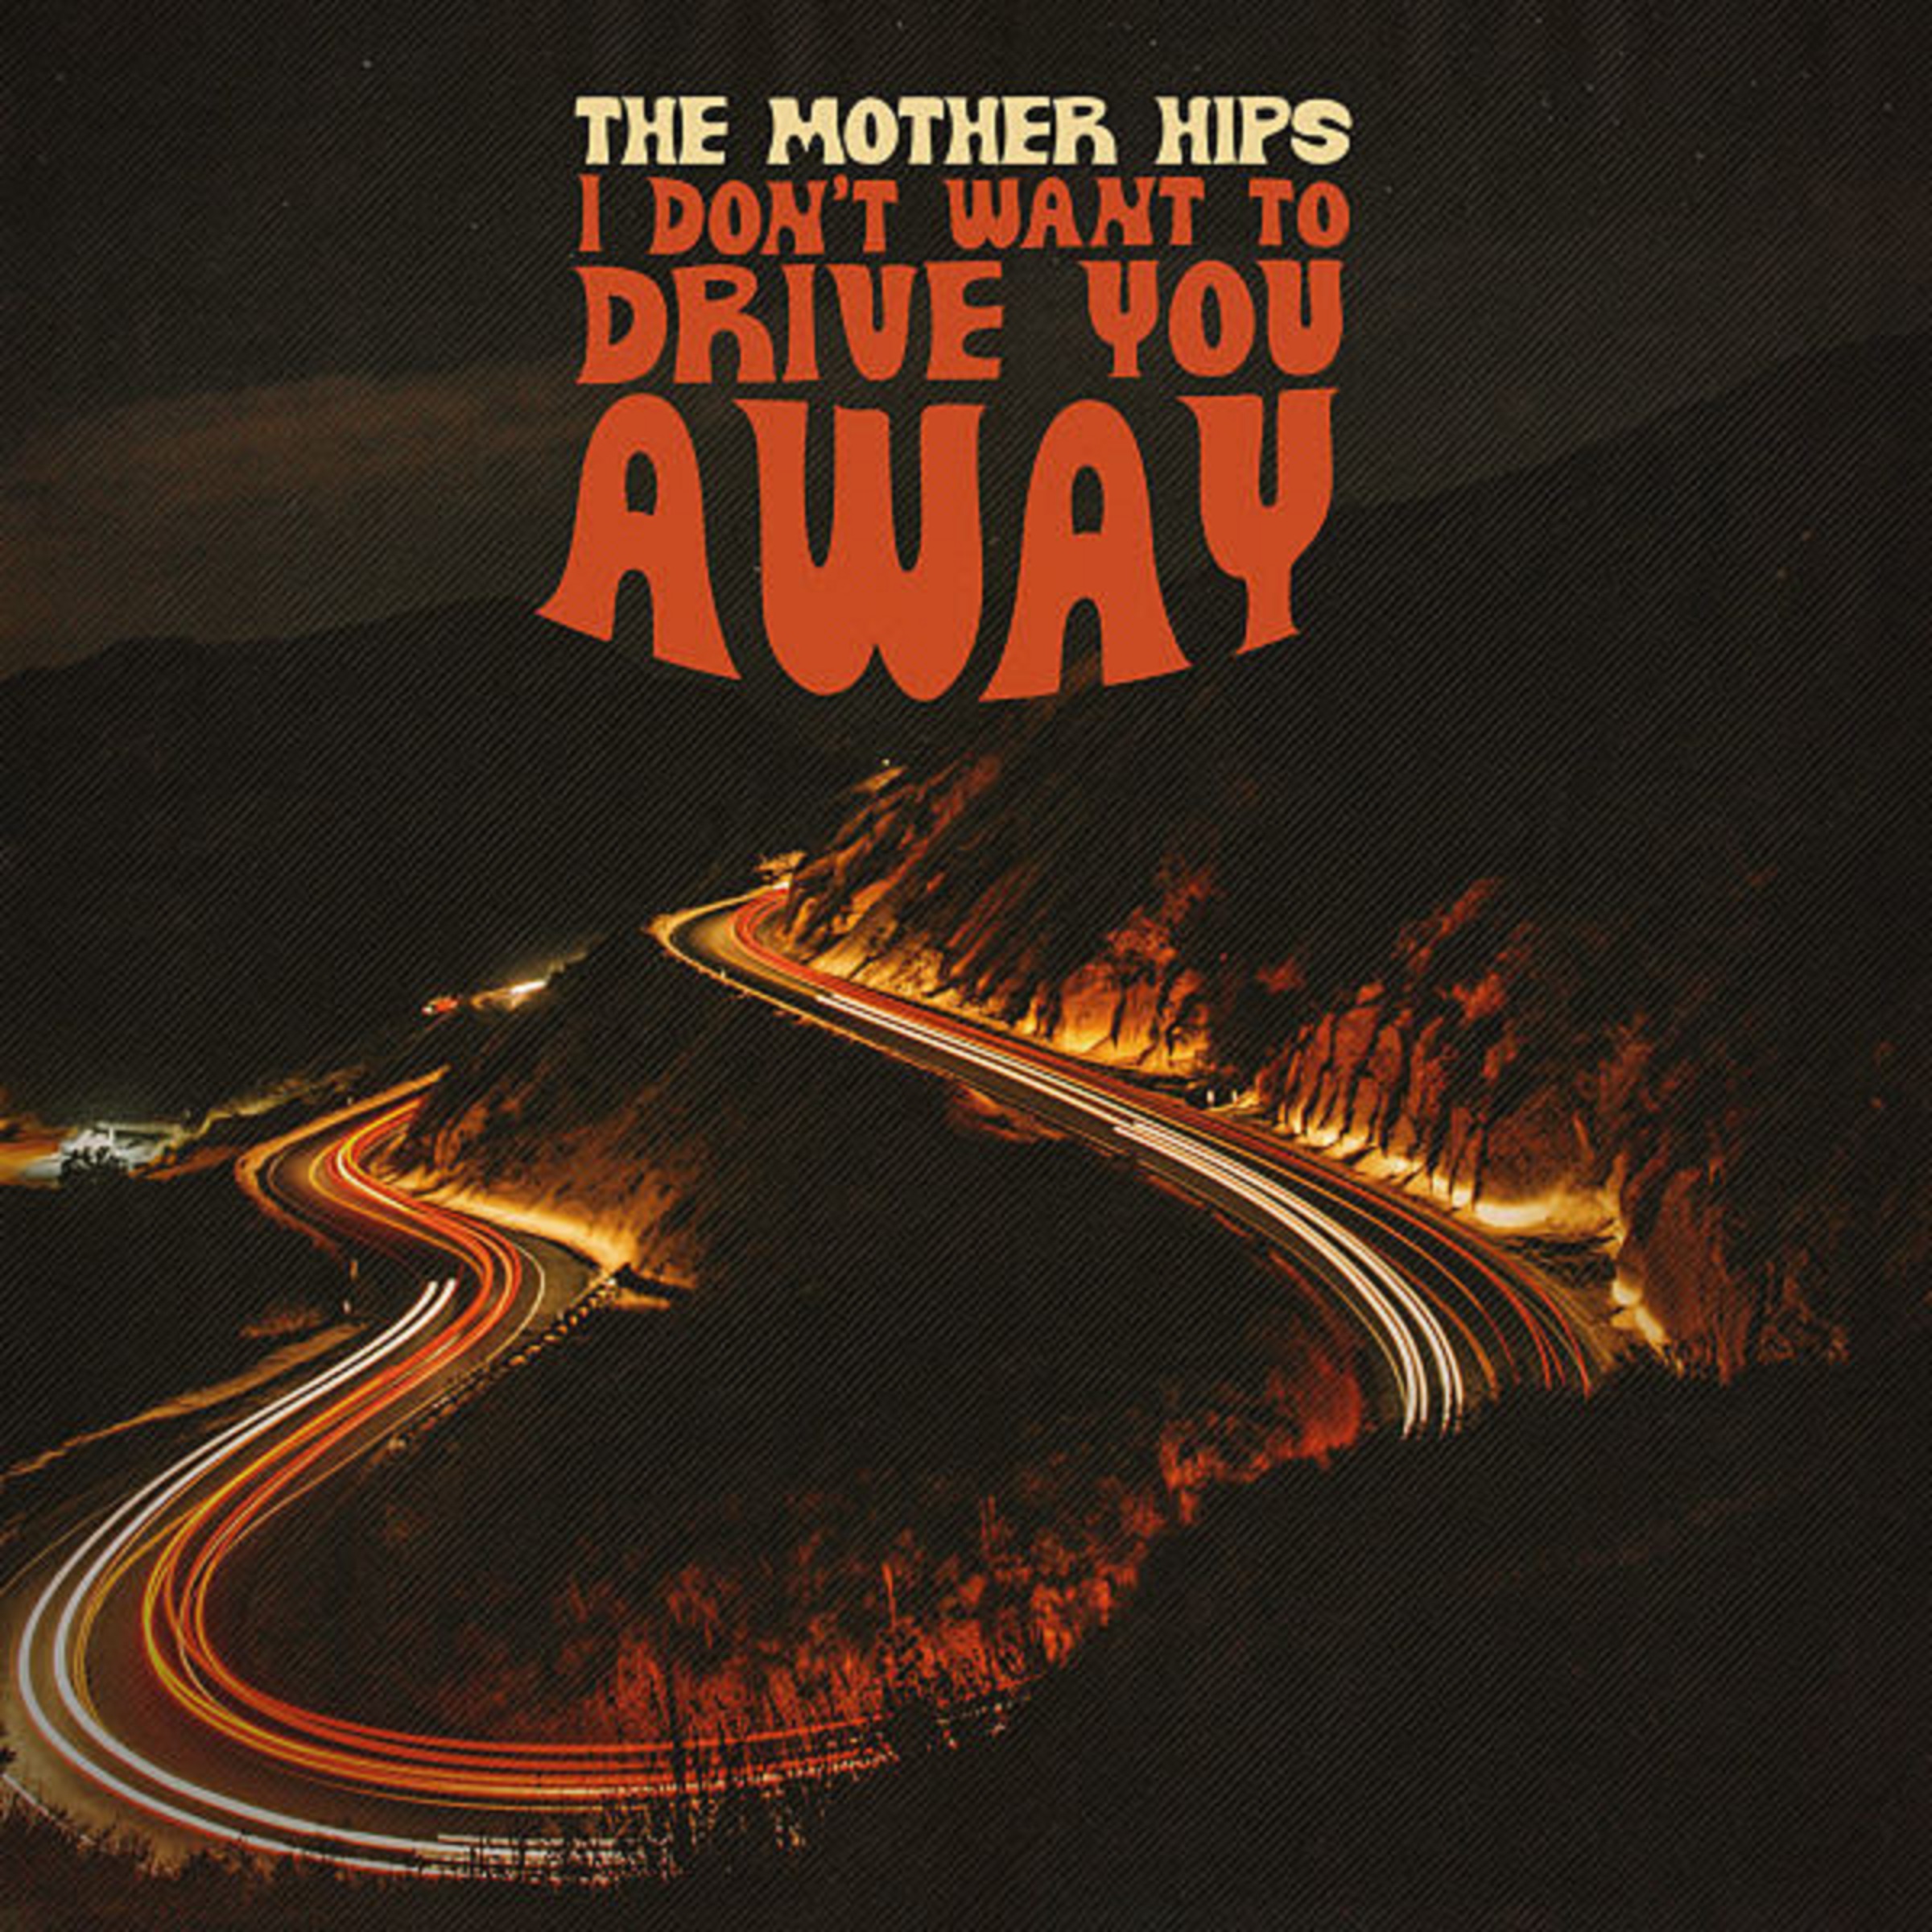 The Mother Hips New Single "I Don't Want To Drive You Away" Out Today